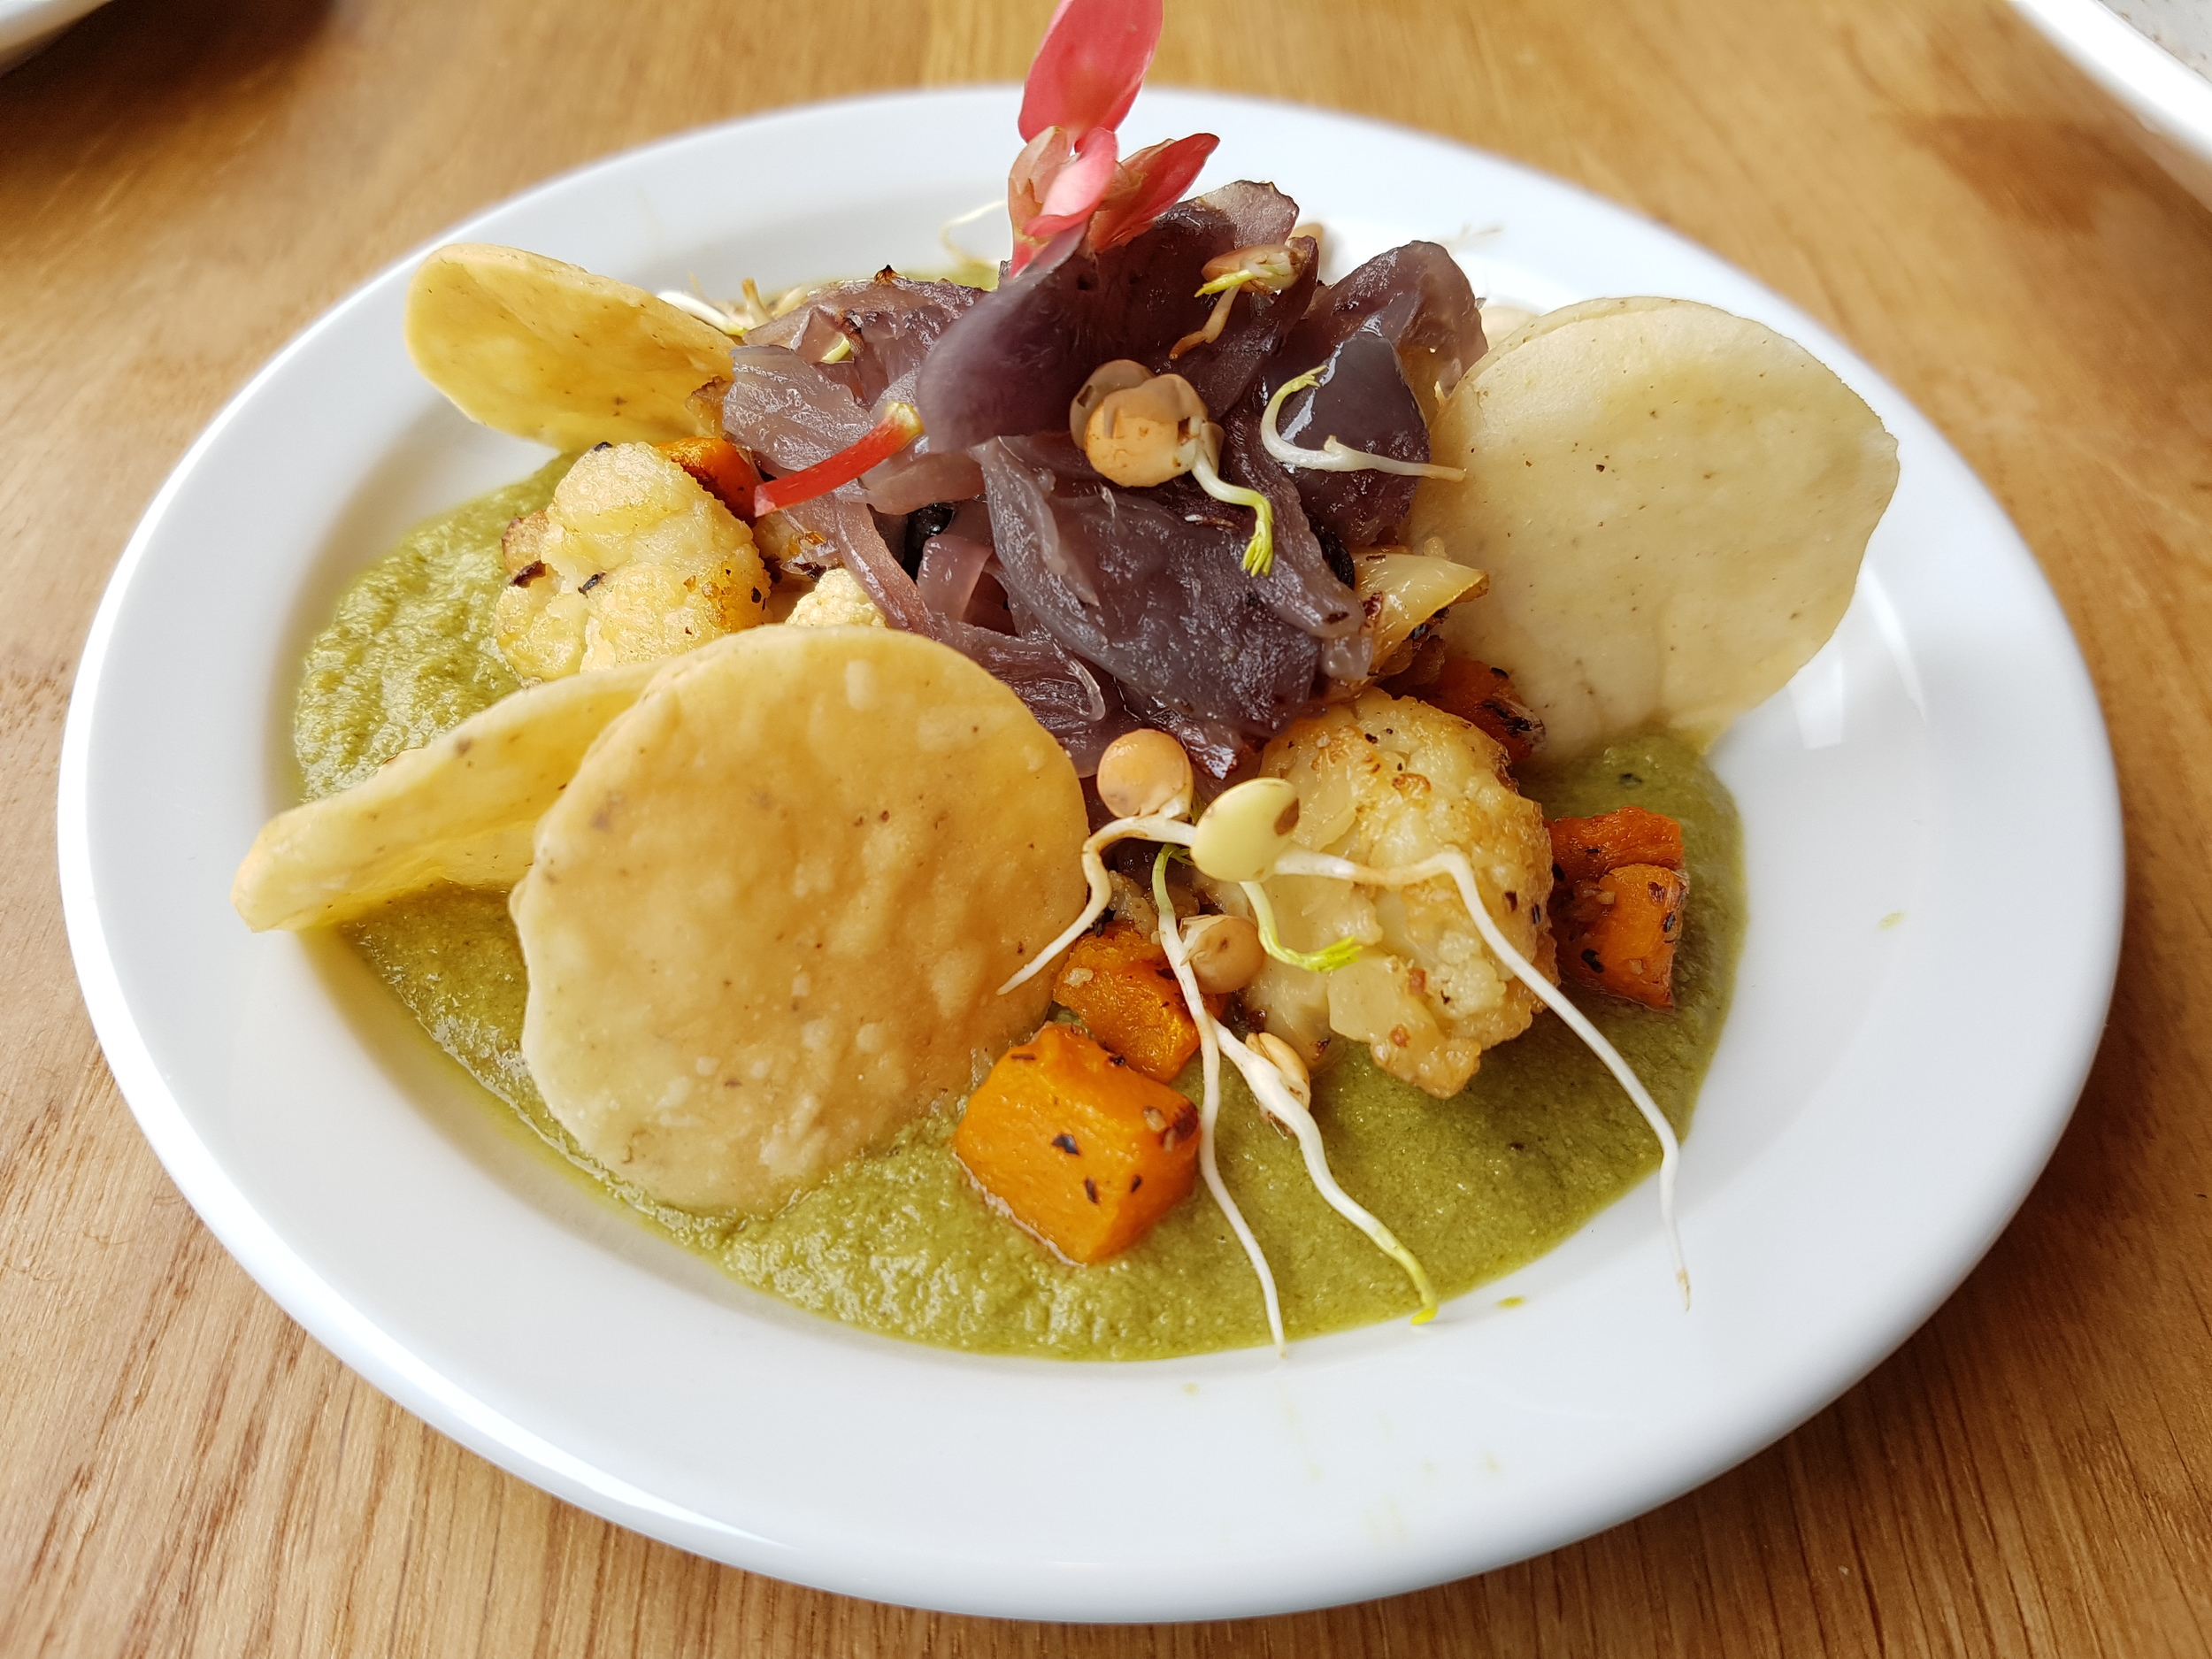 Pipian Mole: Green tomato and nut sauce, served with roasted squash and cauliflower, topped with caramelised onions